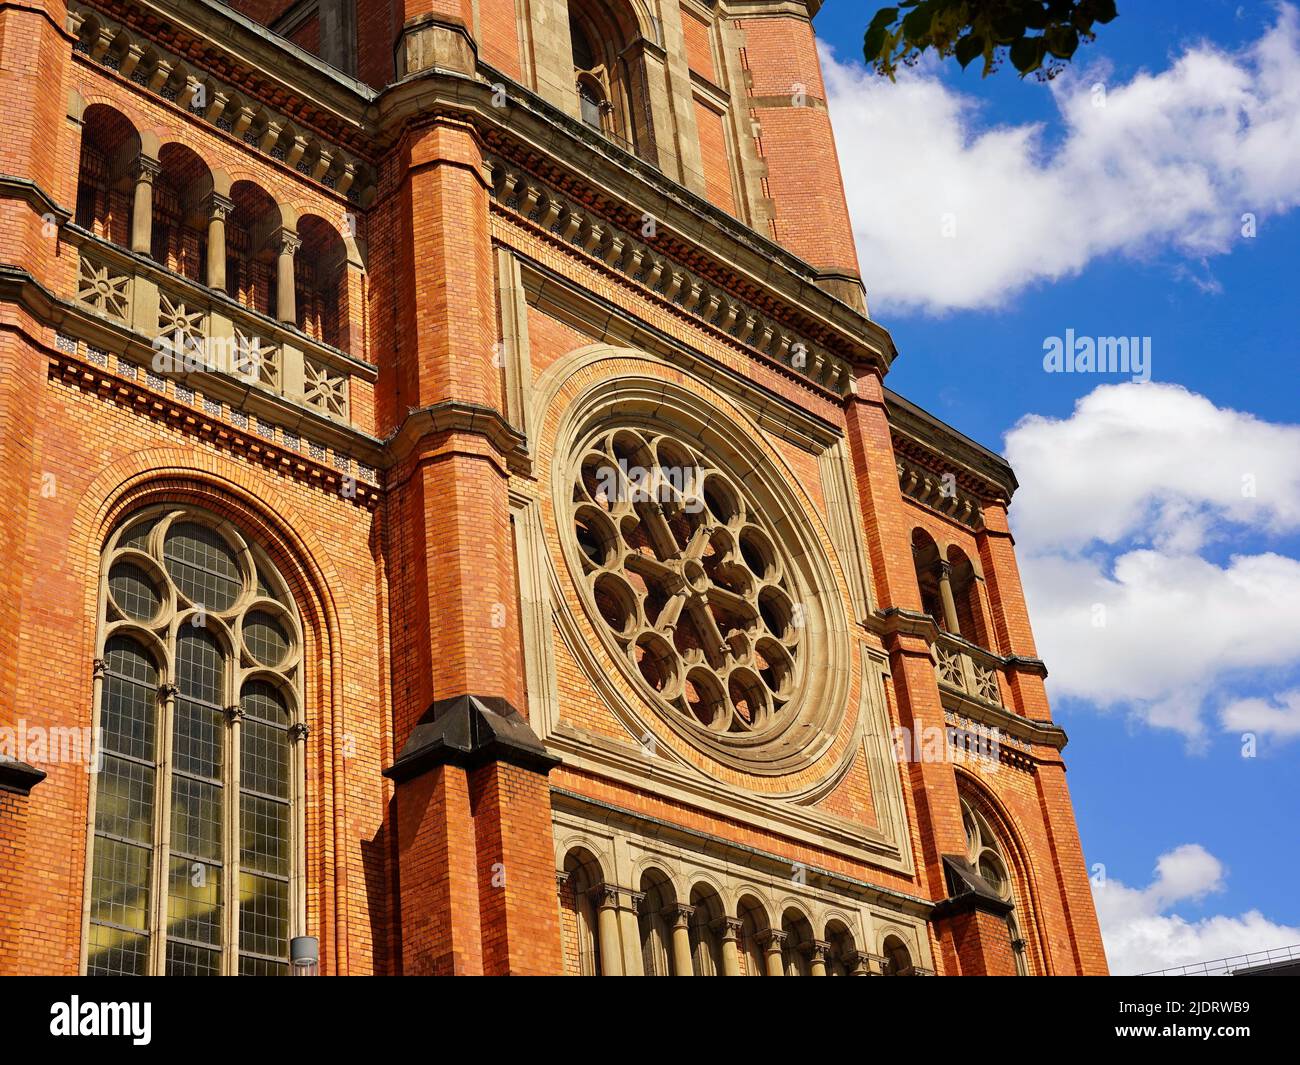 Architectural detail of Johanneskirche, the city church at Martin-Luther-Platz in downtown Düsseldorf/Germany. It was built in 1881. Stock Photo